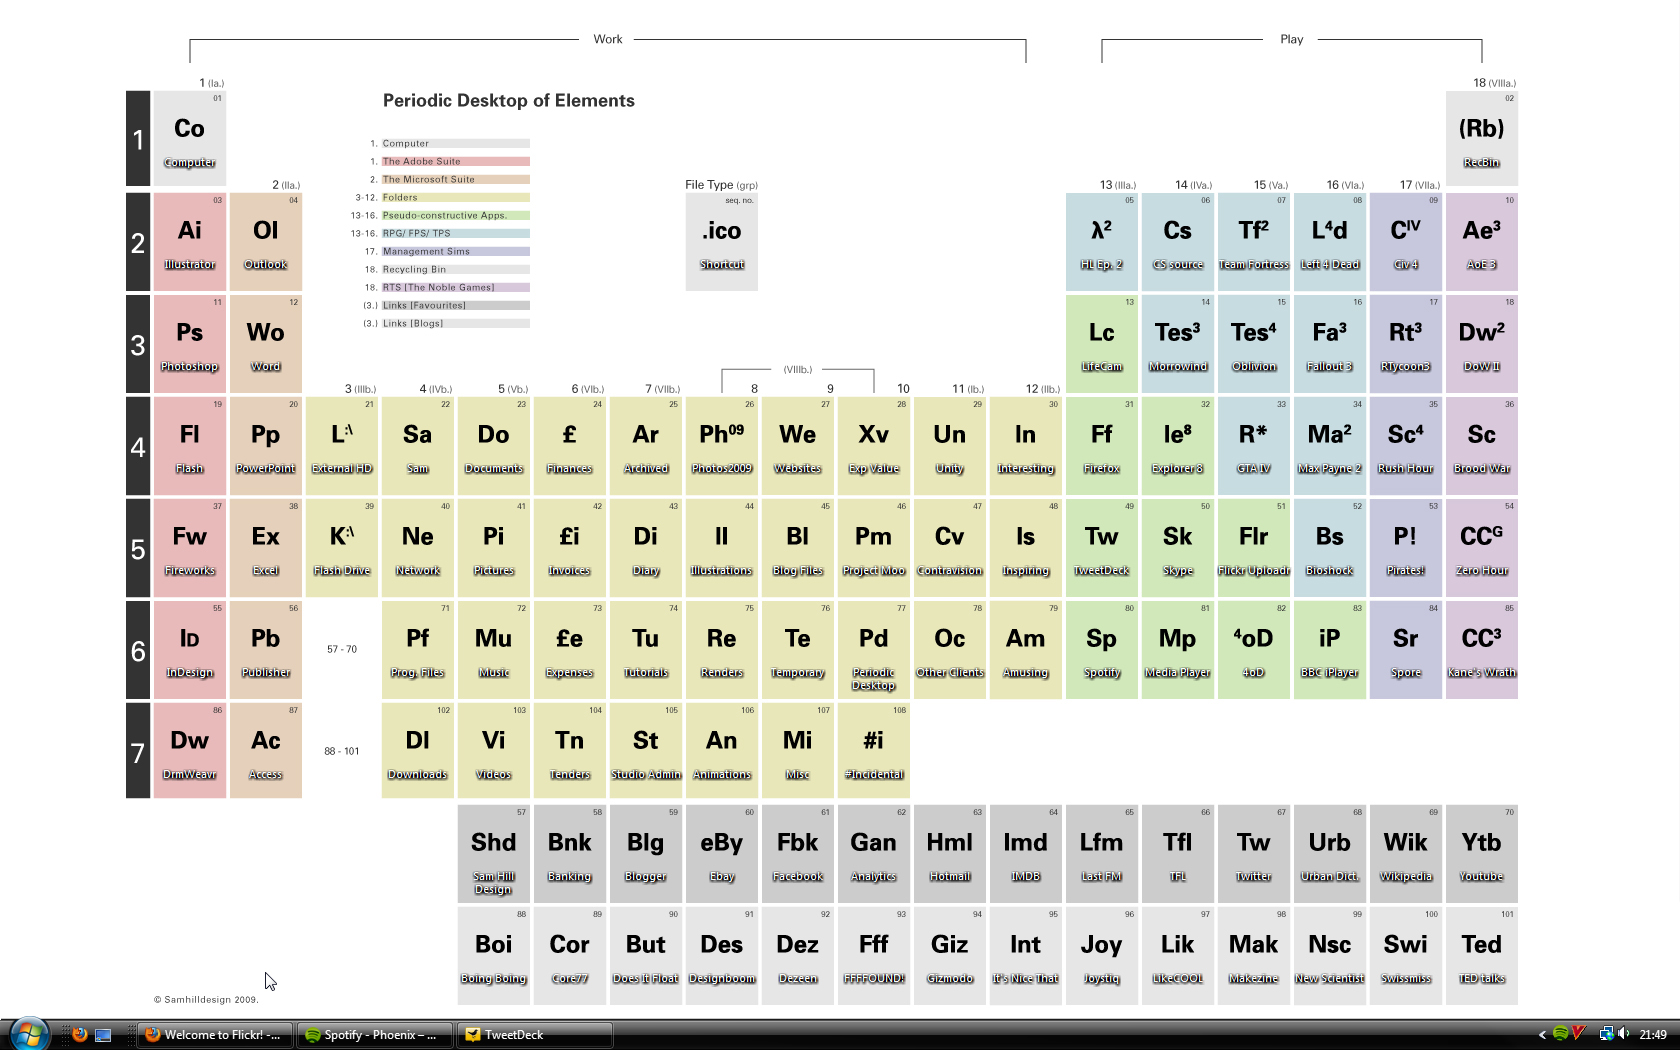 Periodic Desktop of the Elements (in Use)